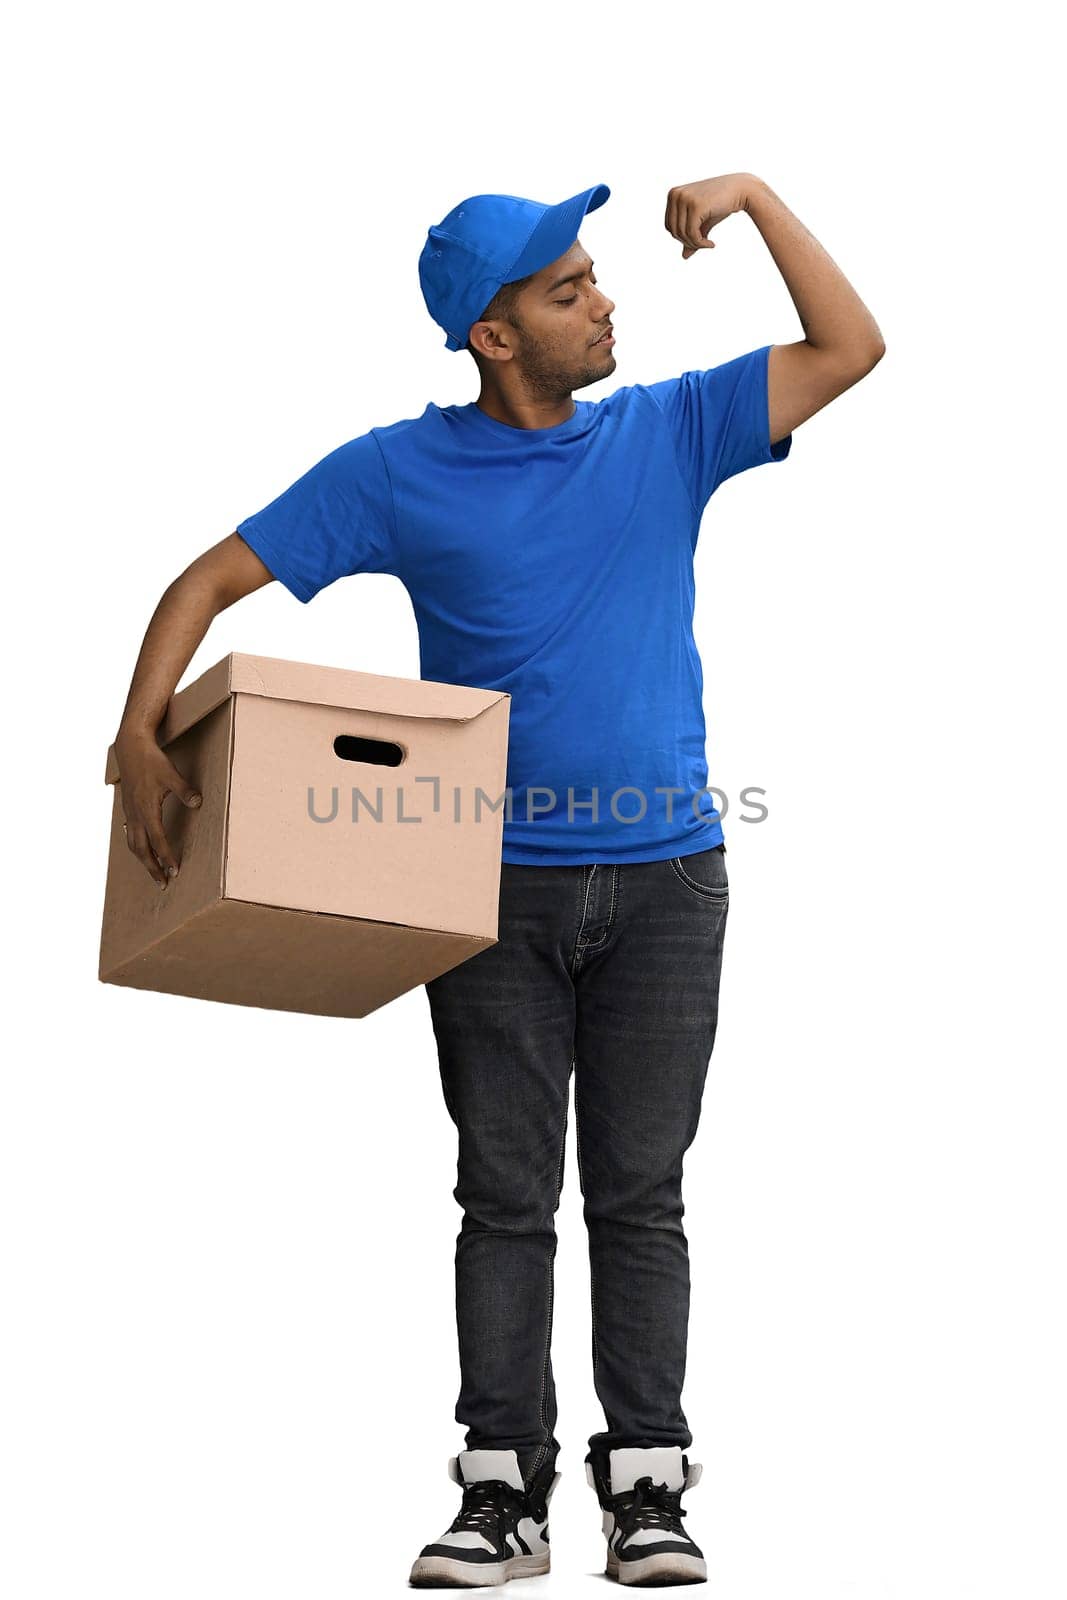 A man on a white background with box demonstrates strength with his hand.